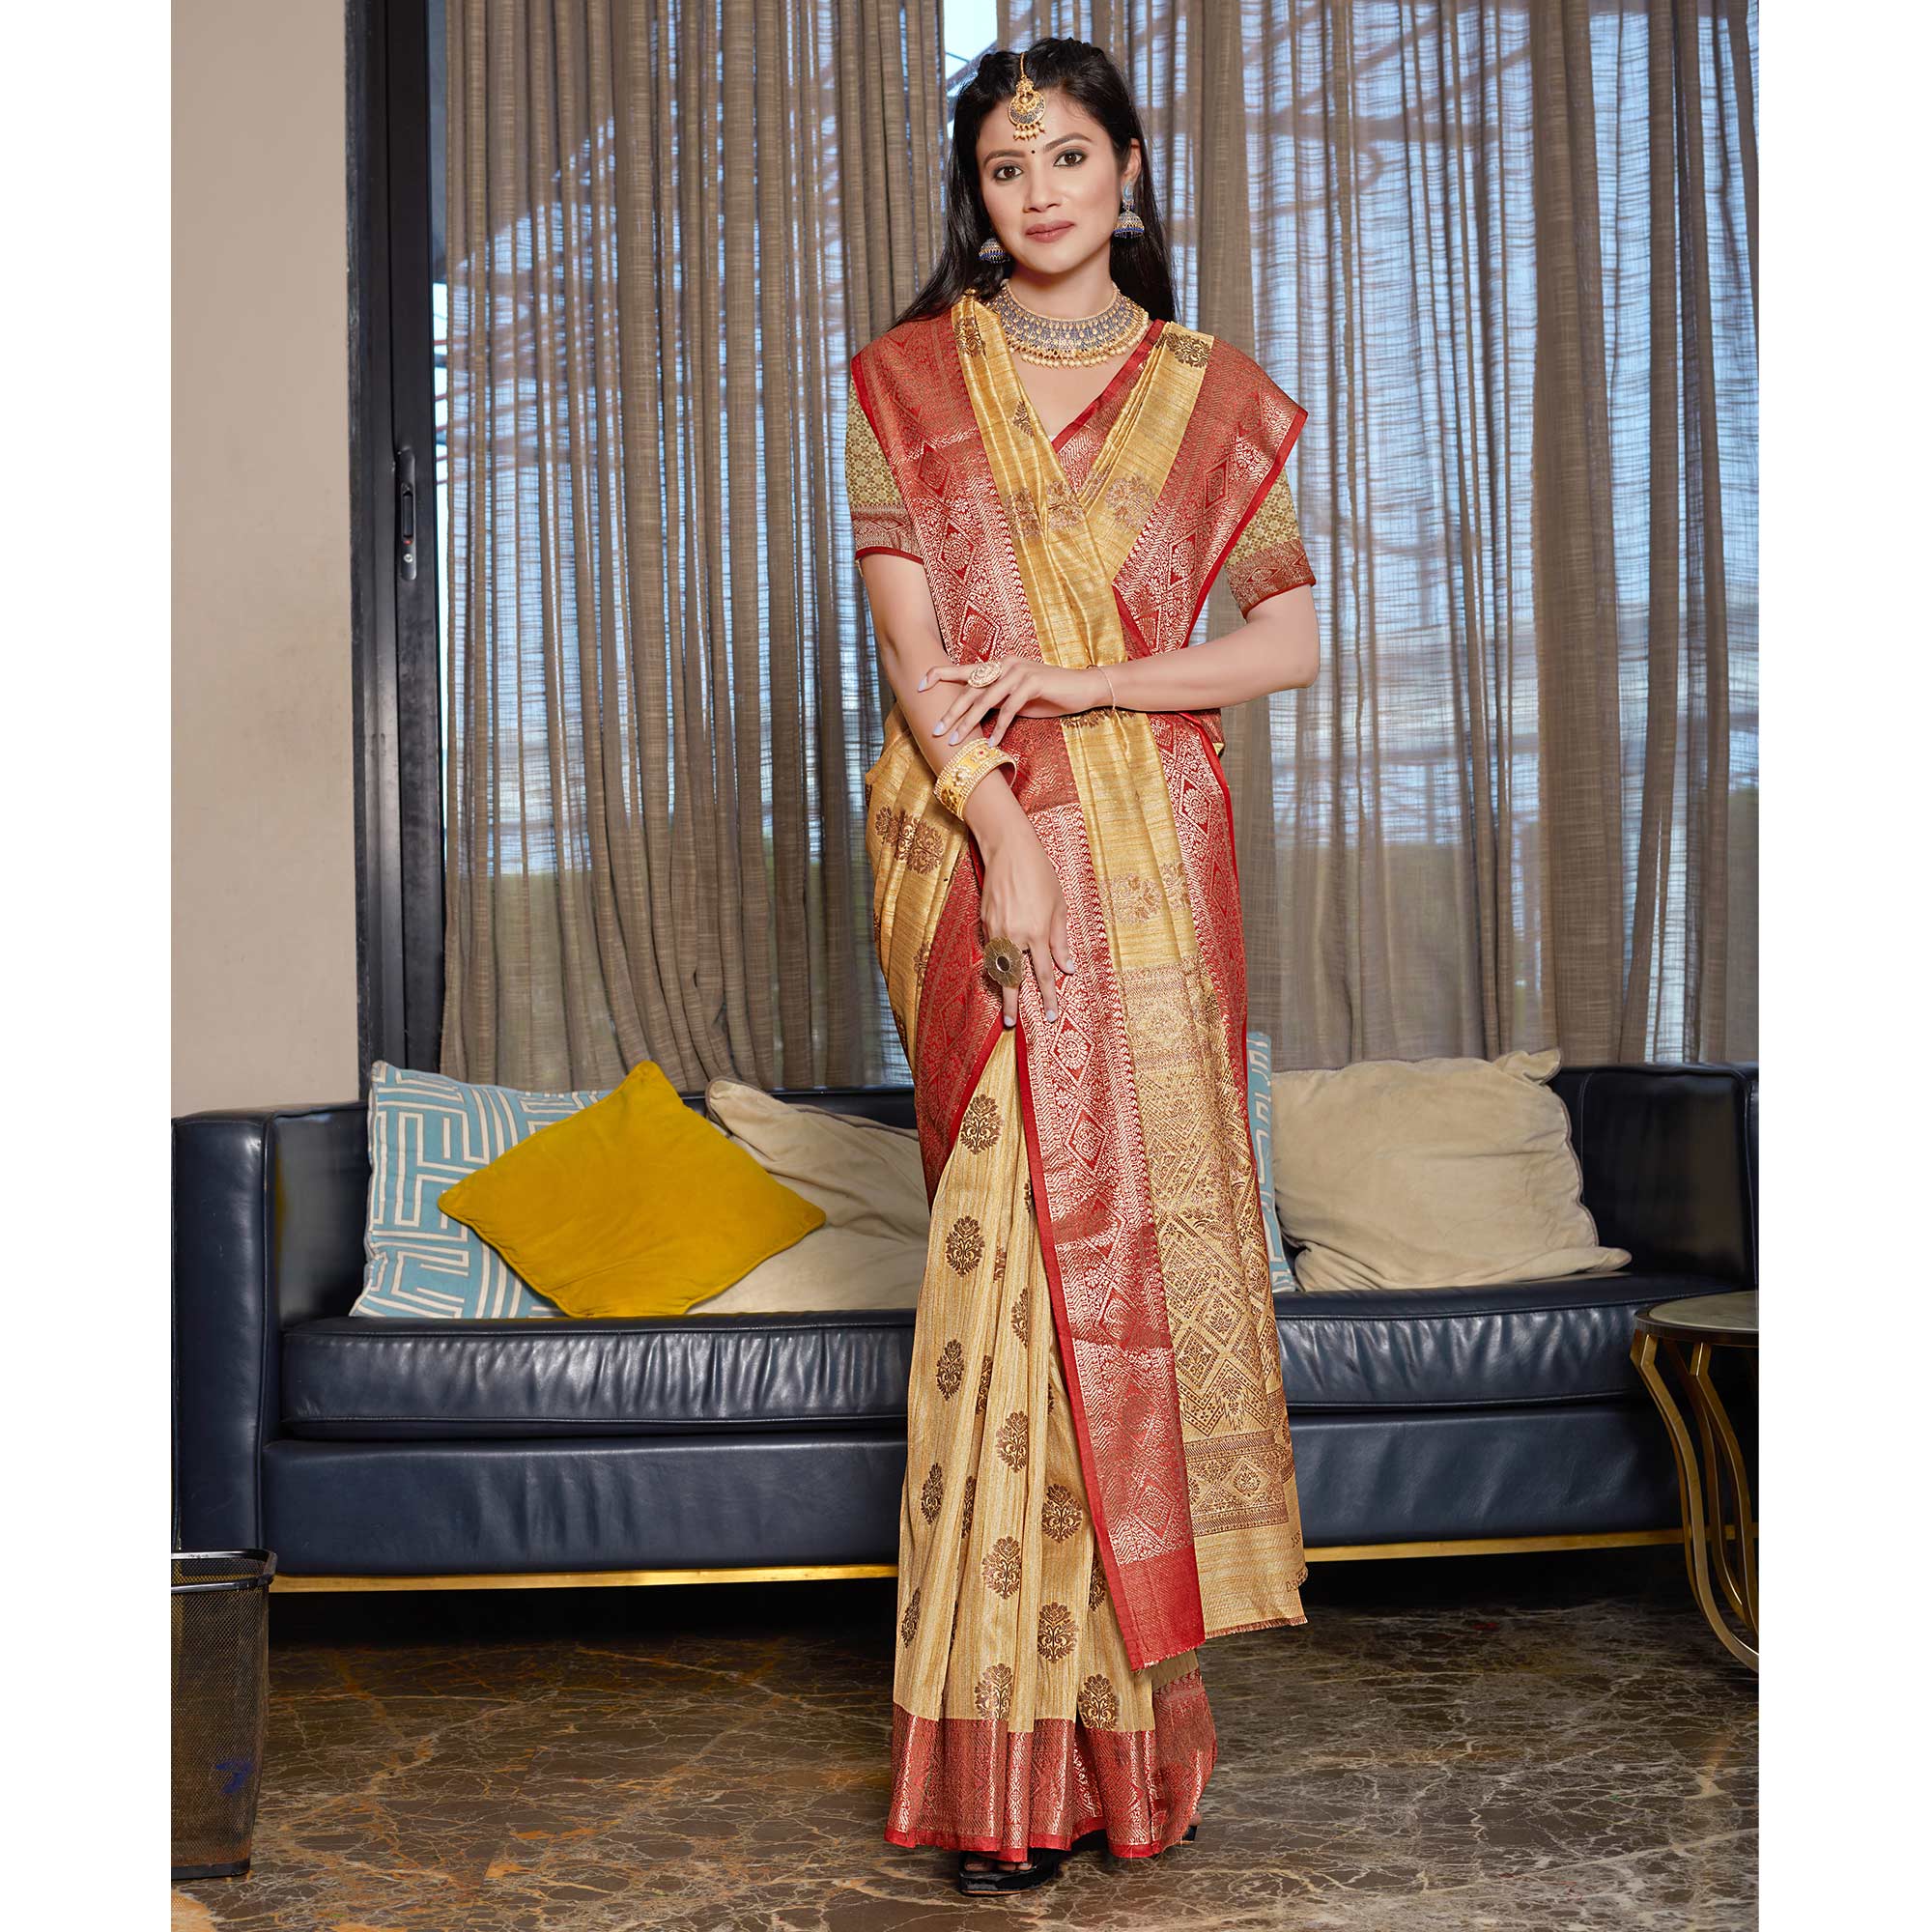 Chikoo Floral Woven Cotton Blend Saree